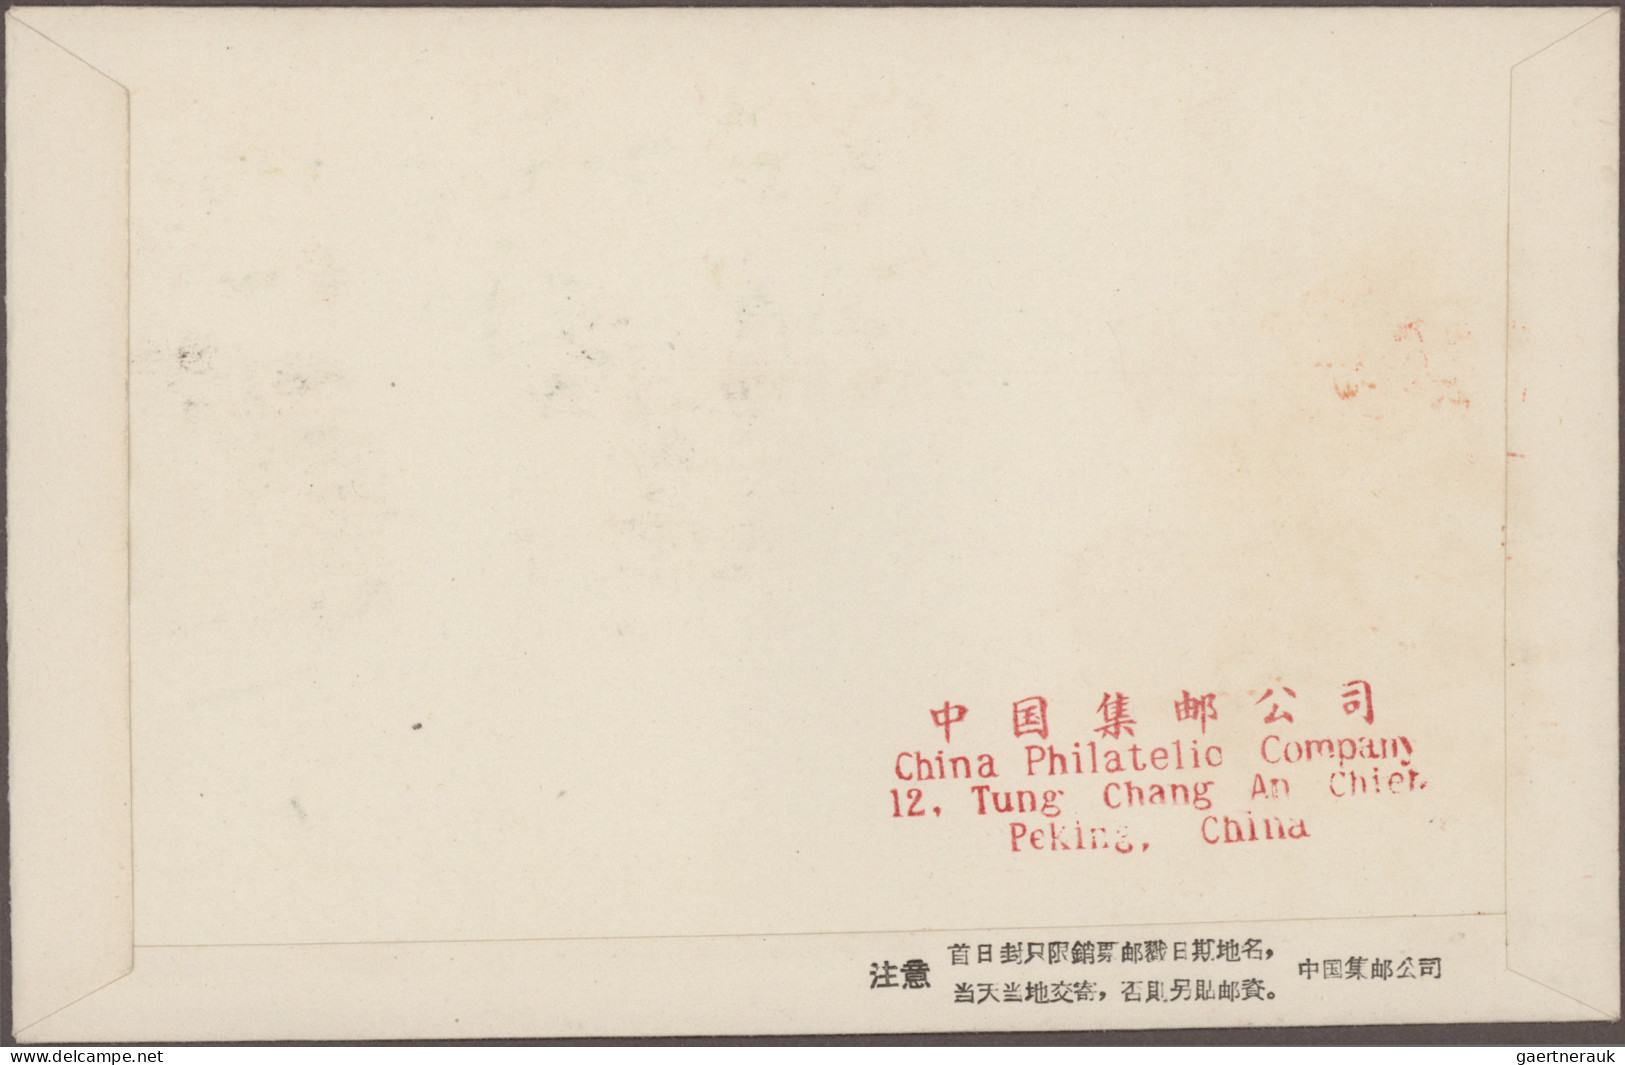 China (PRC): 1960/61, Chrysanthemum (S44) on six unaddressed cacheted official F